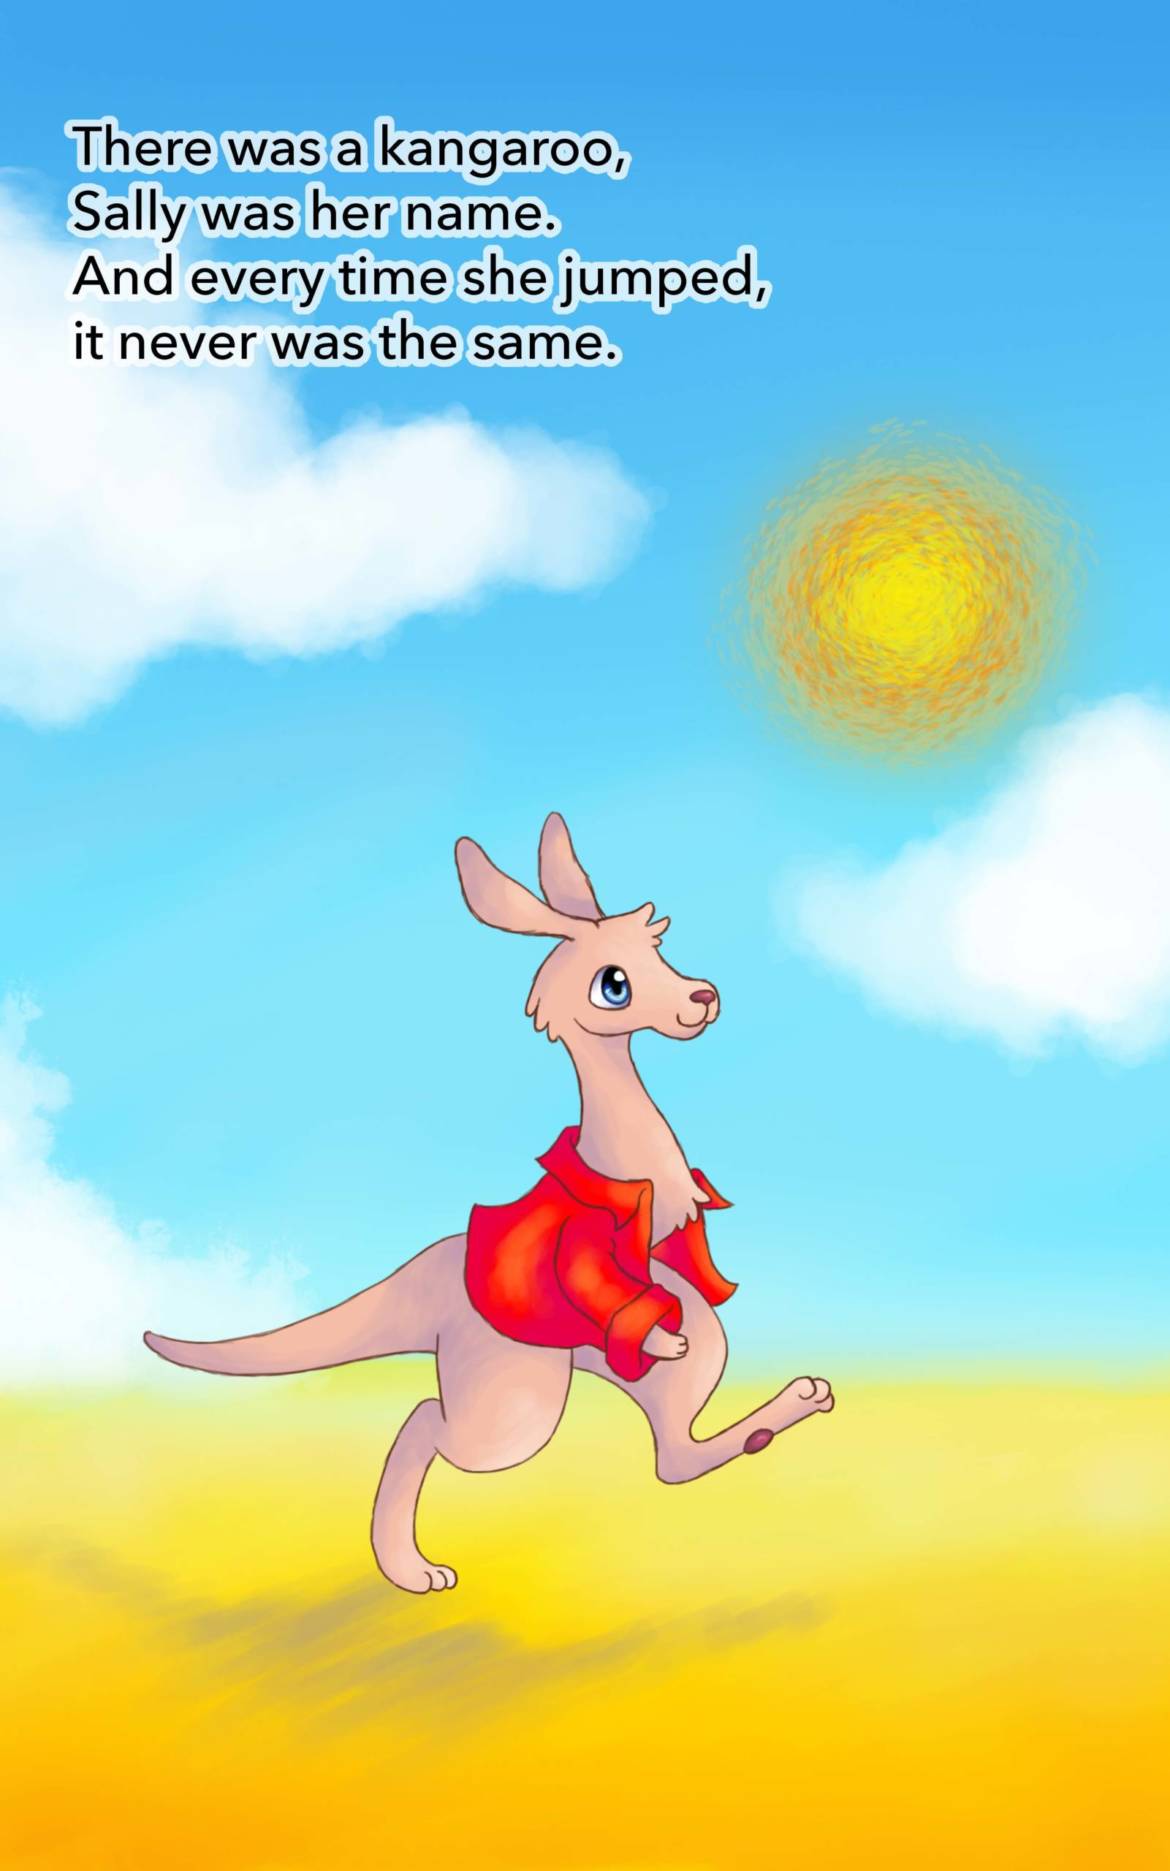 Sally-The-Speedy-Kangaroo-Preview_Page_1-scaled.jpg